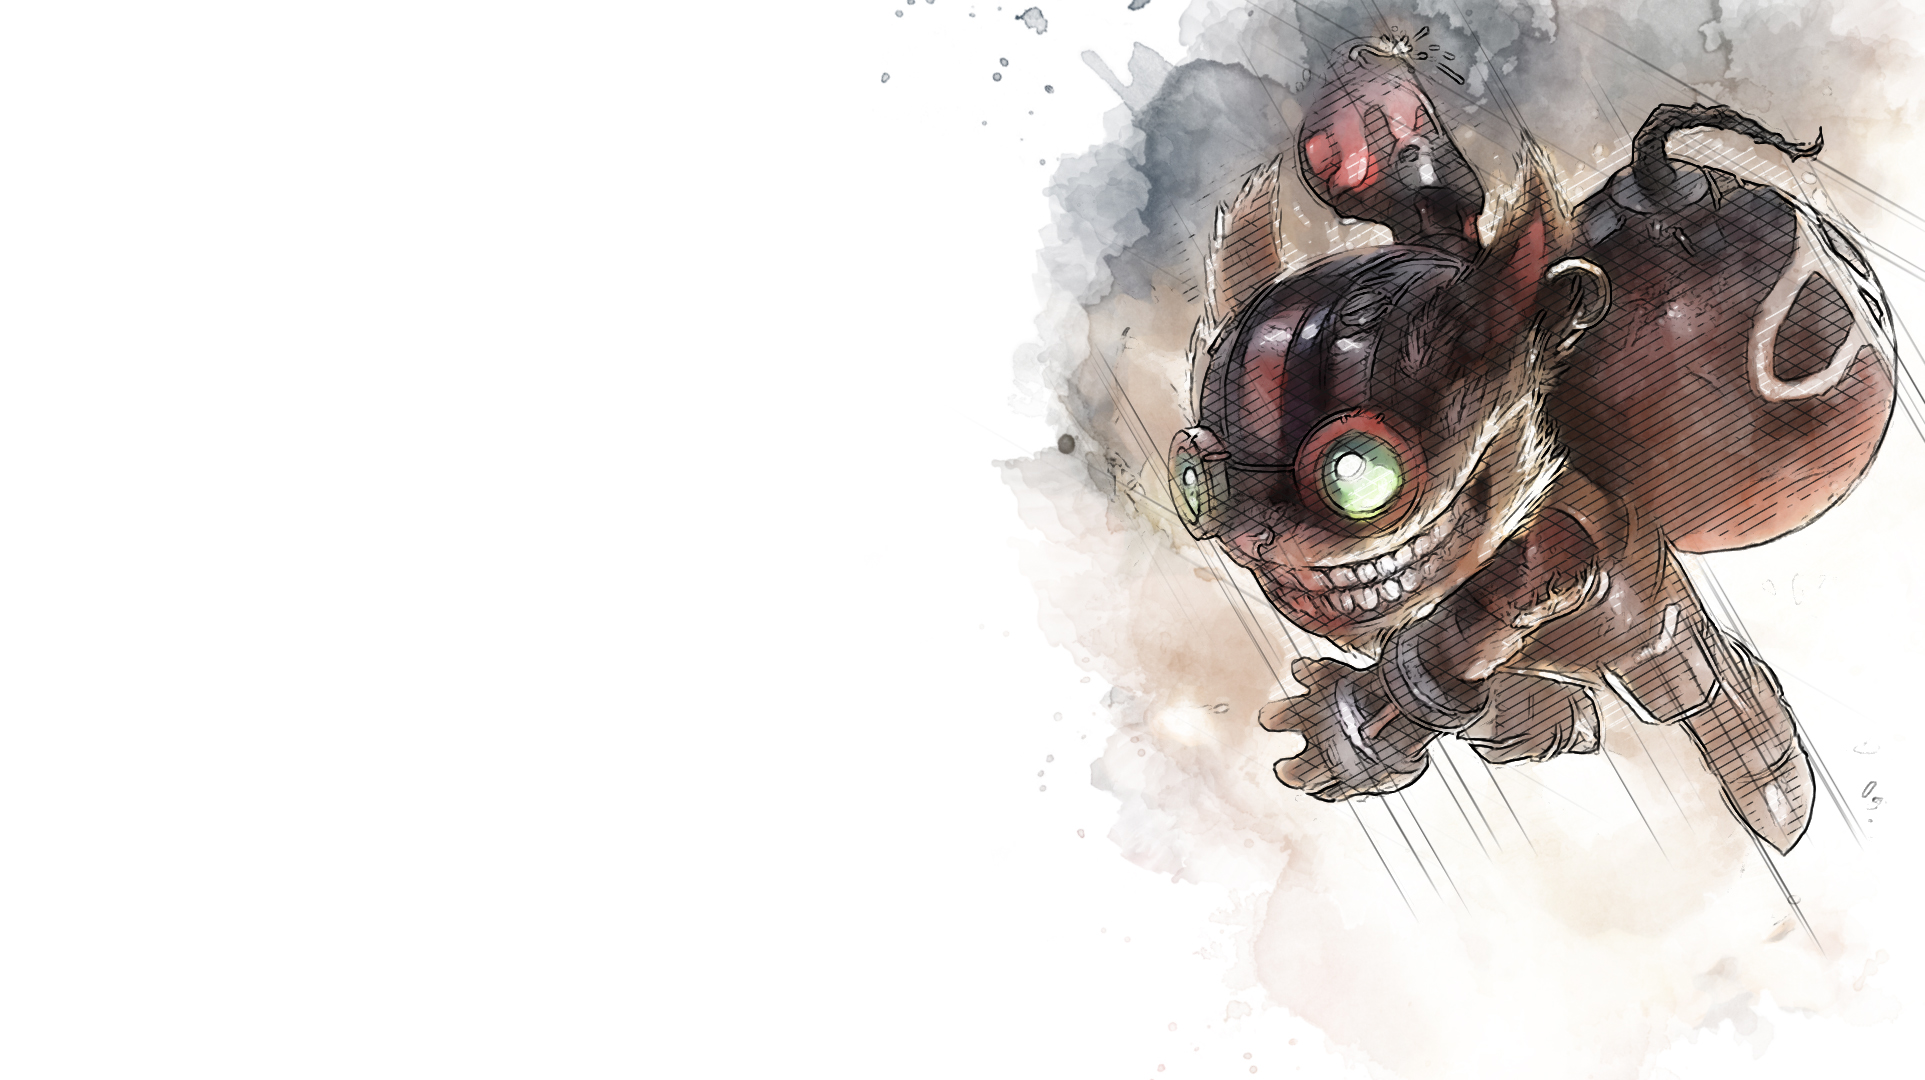 Ziggs Wallpaper I Made While Playing With Photoshop - League Of Legends Ziggs , HD Wallpaper & Backgrounds